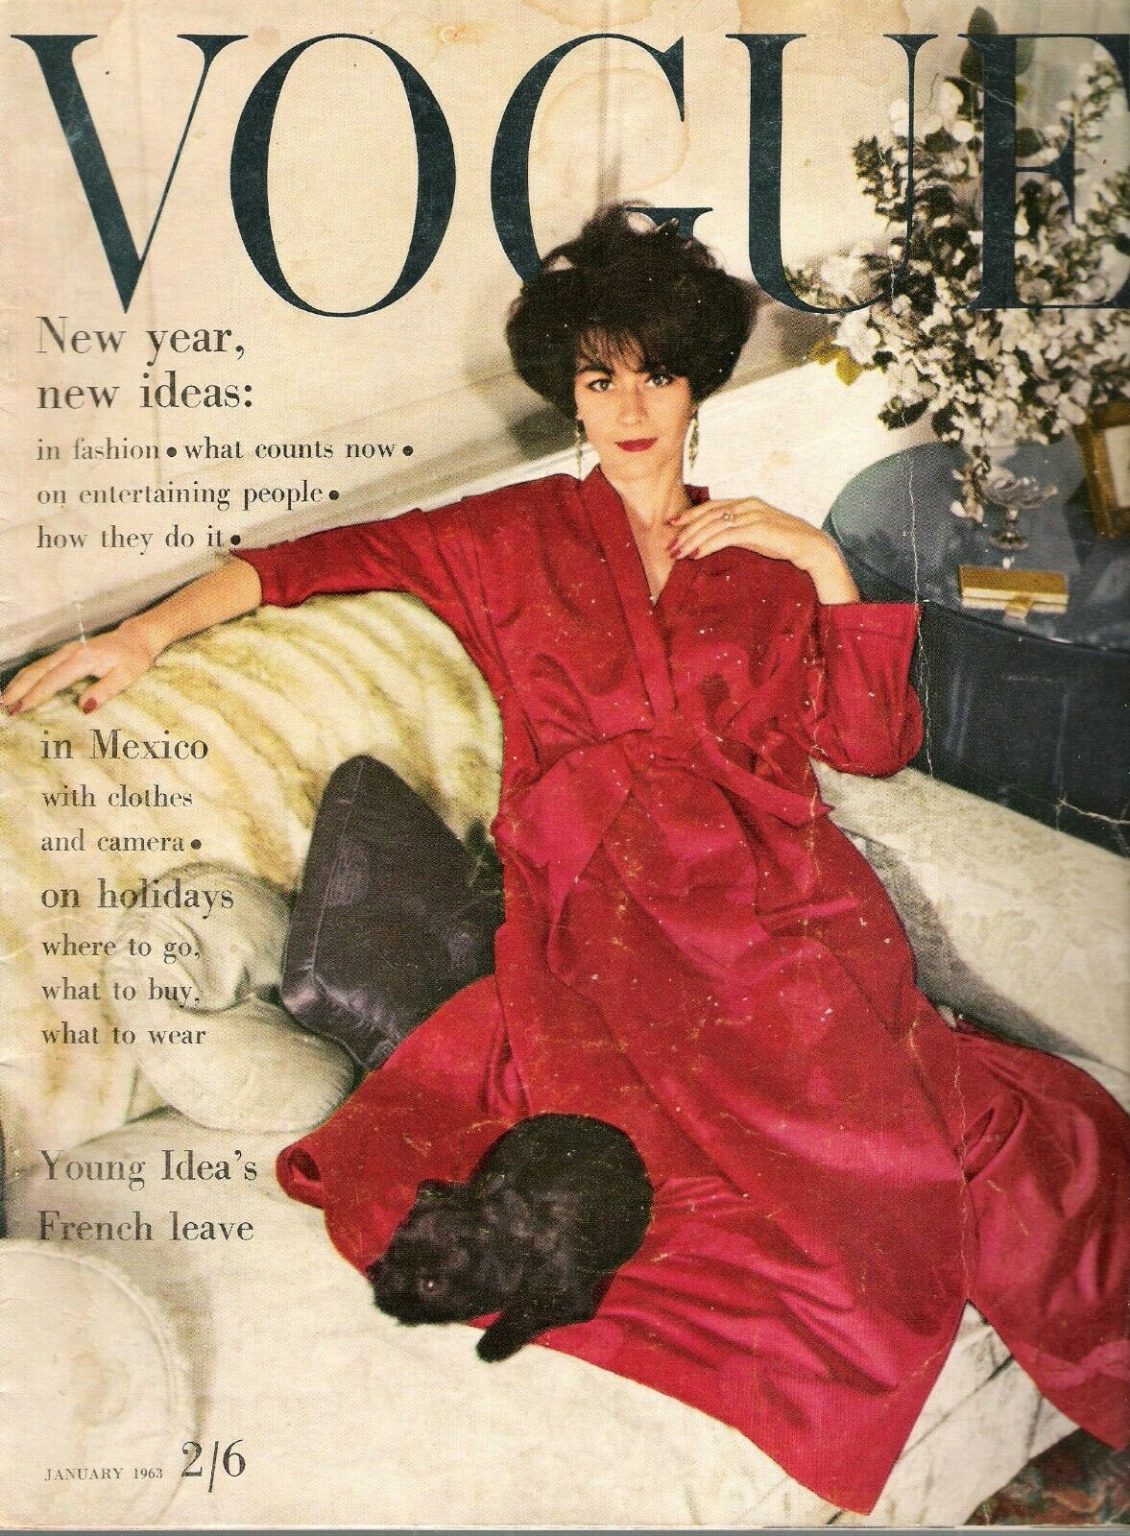 417. January, 1963 1159 British Vogue Covers History of Fashion